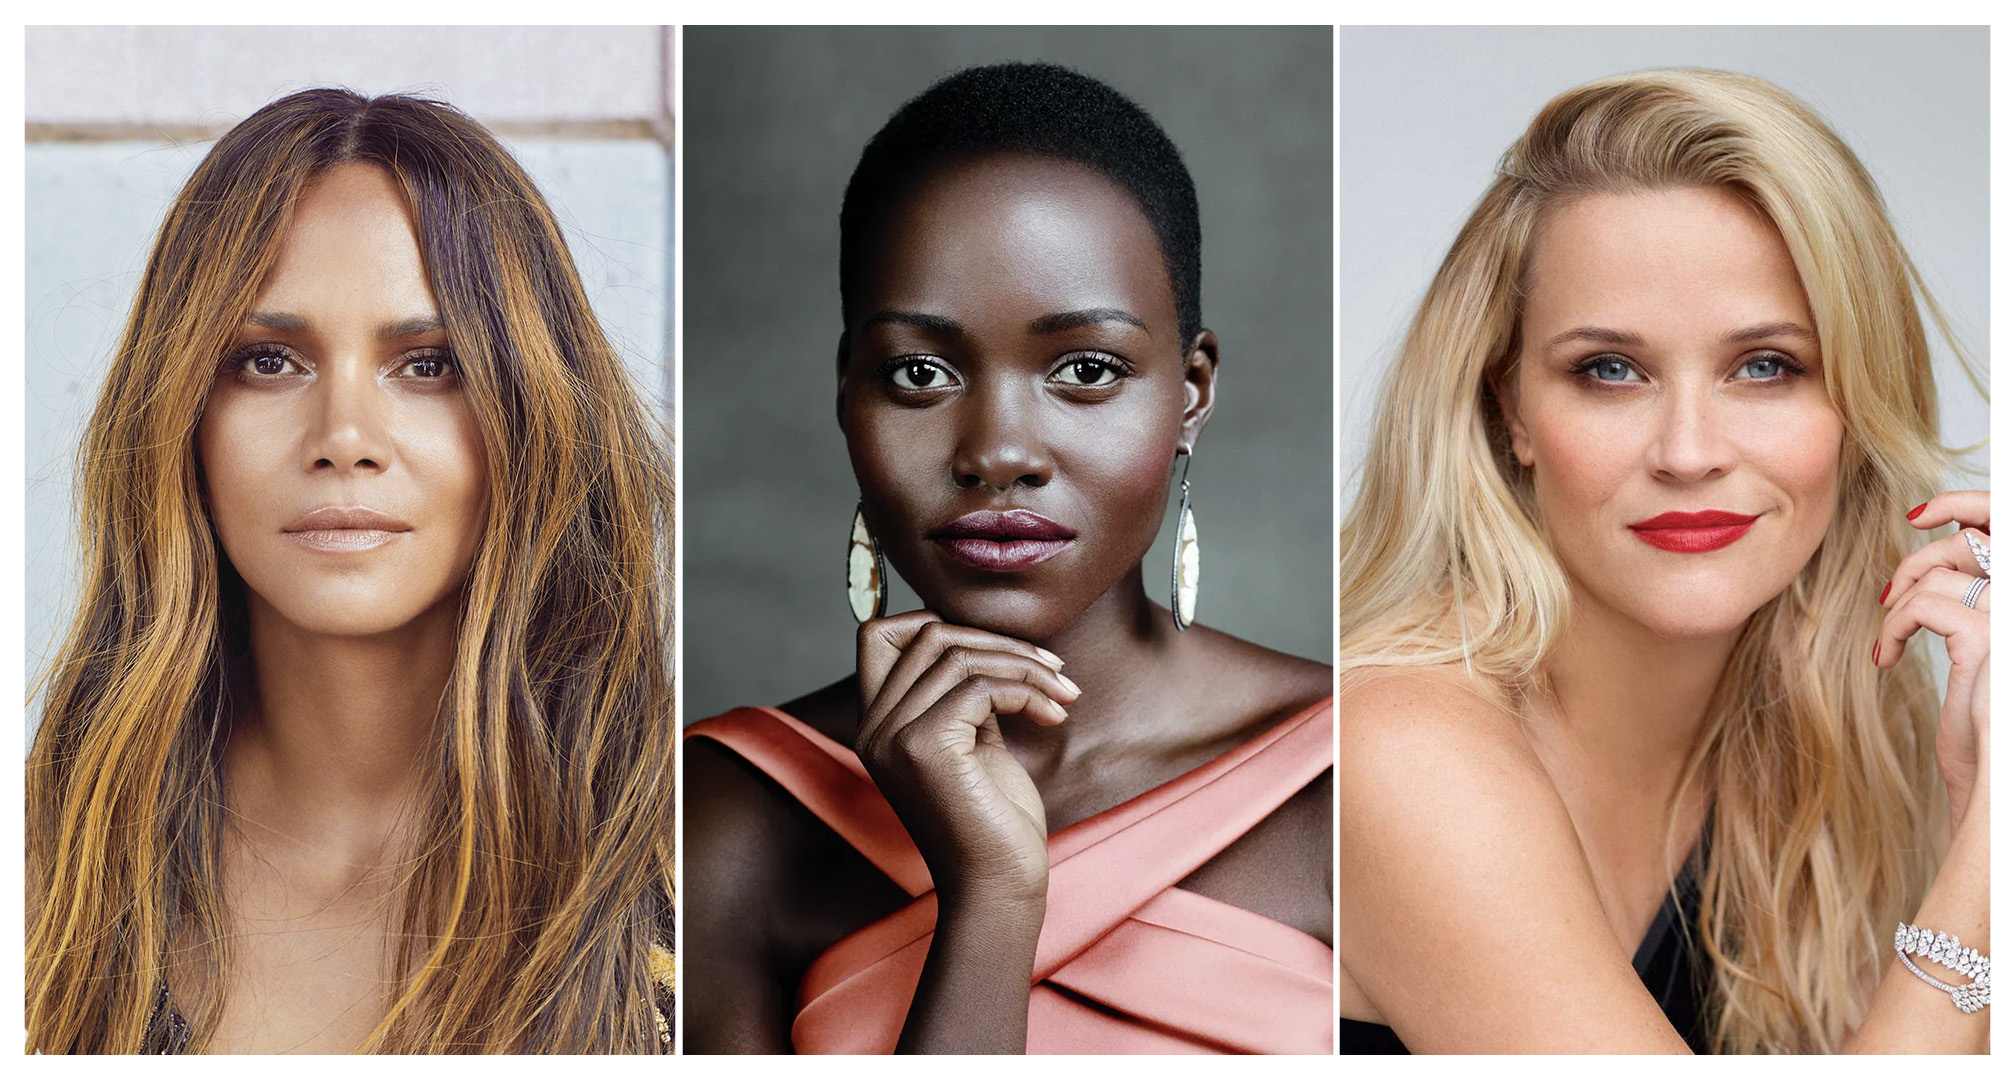 Collage aus halle berry, lupita nyong'o, und reese witherspoon